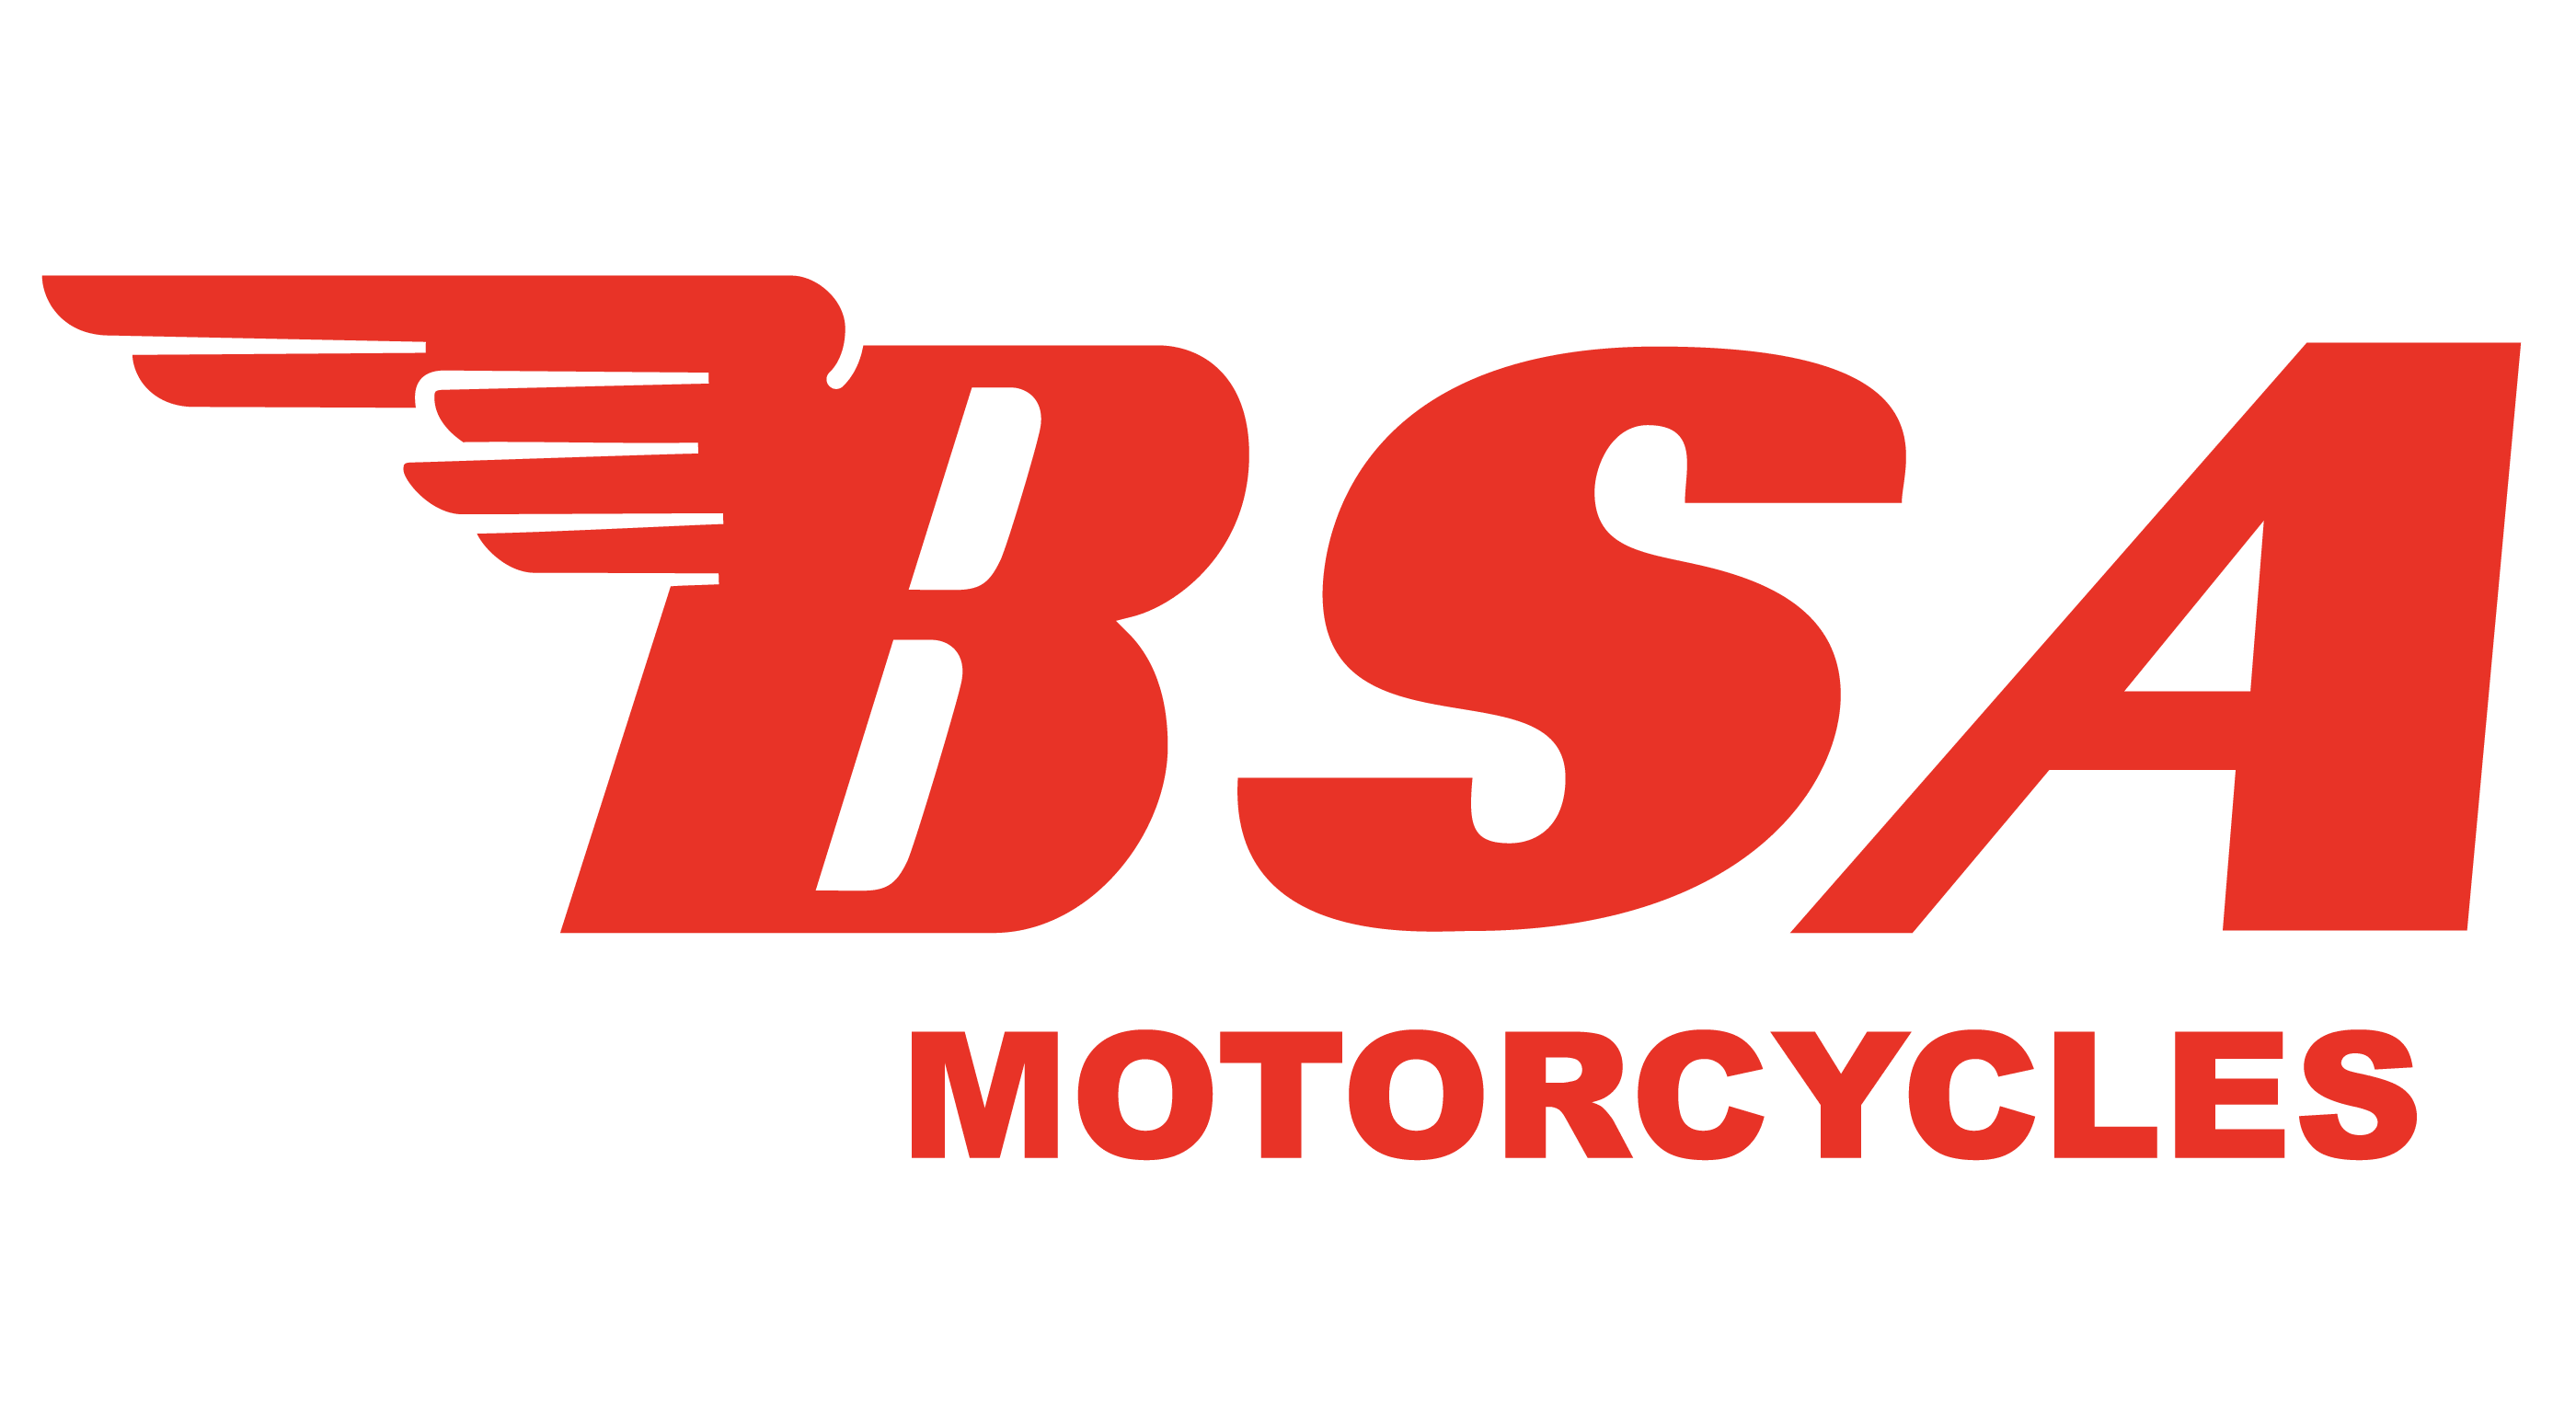 Bsa Logo Motorcycles - Ajs Motorcycles Vector, Transparent background PNG HD thumbnail